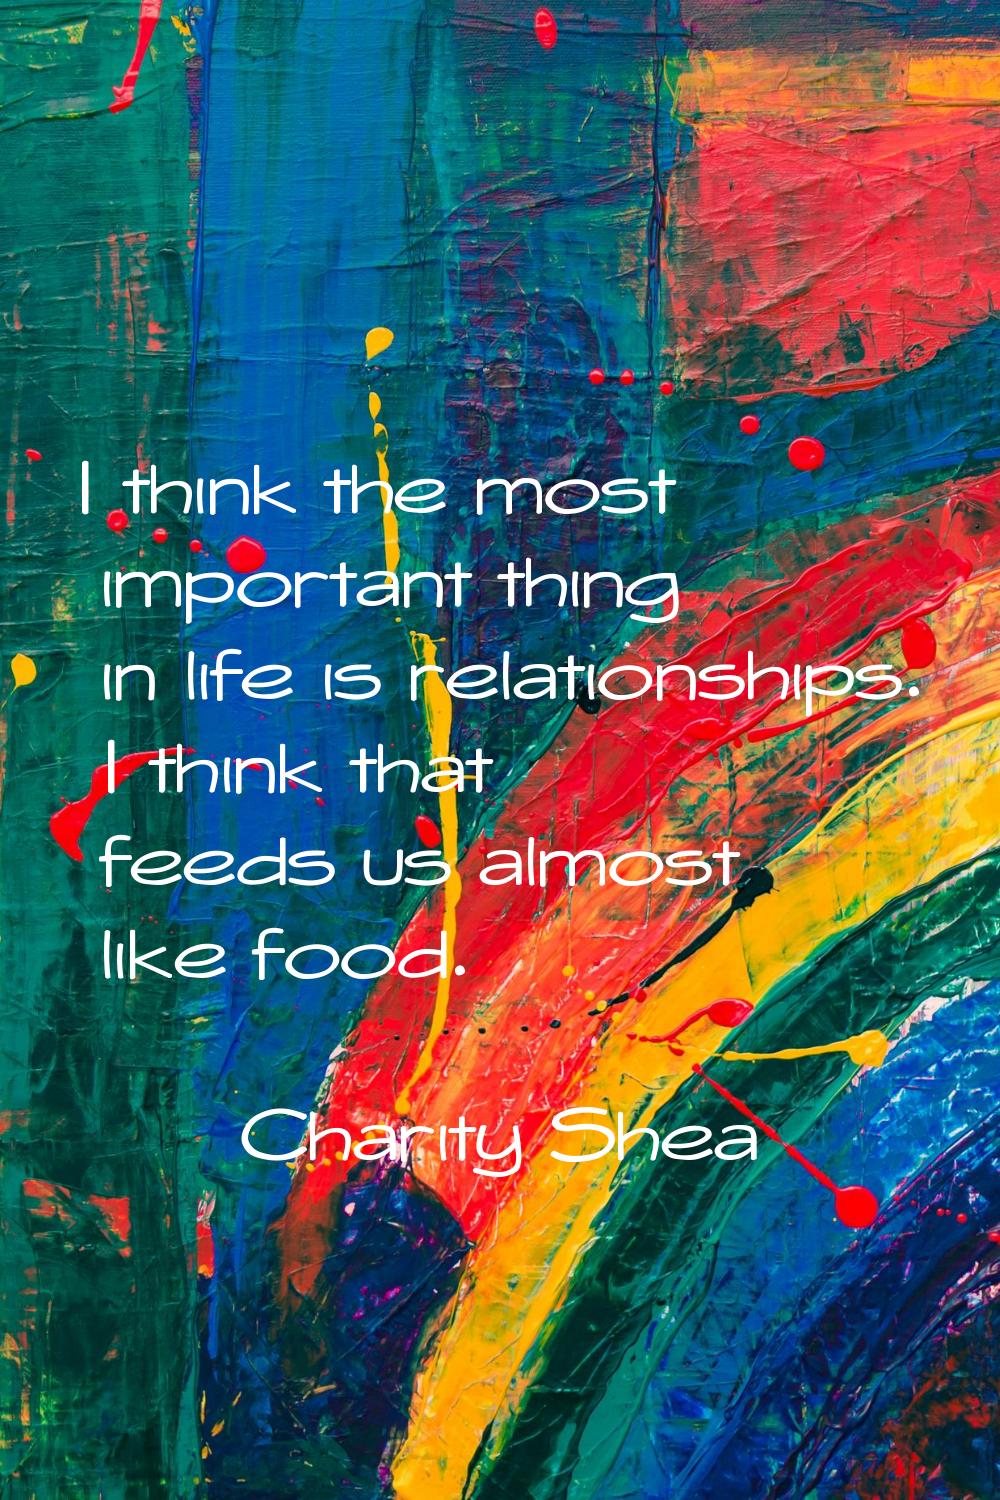 I think the most important thing in life is relationships. I think that feeds us almost like food.